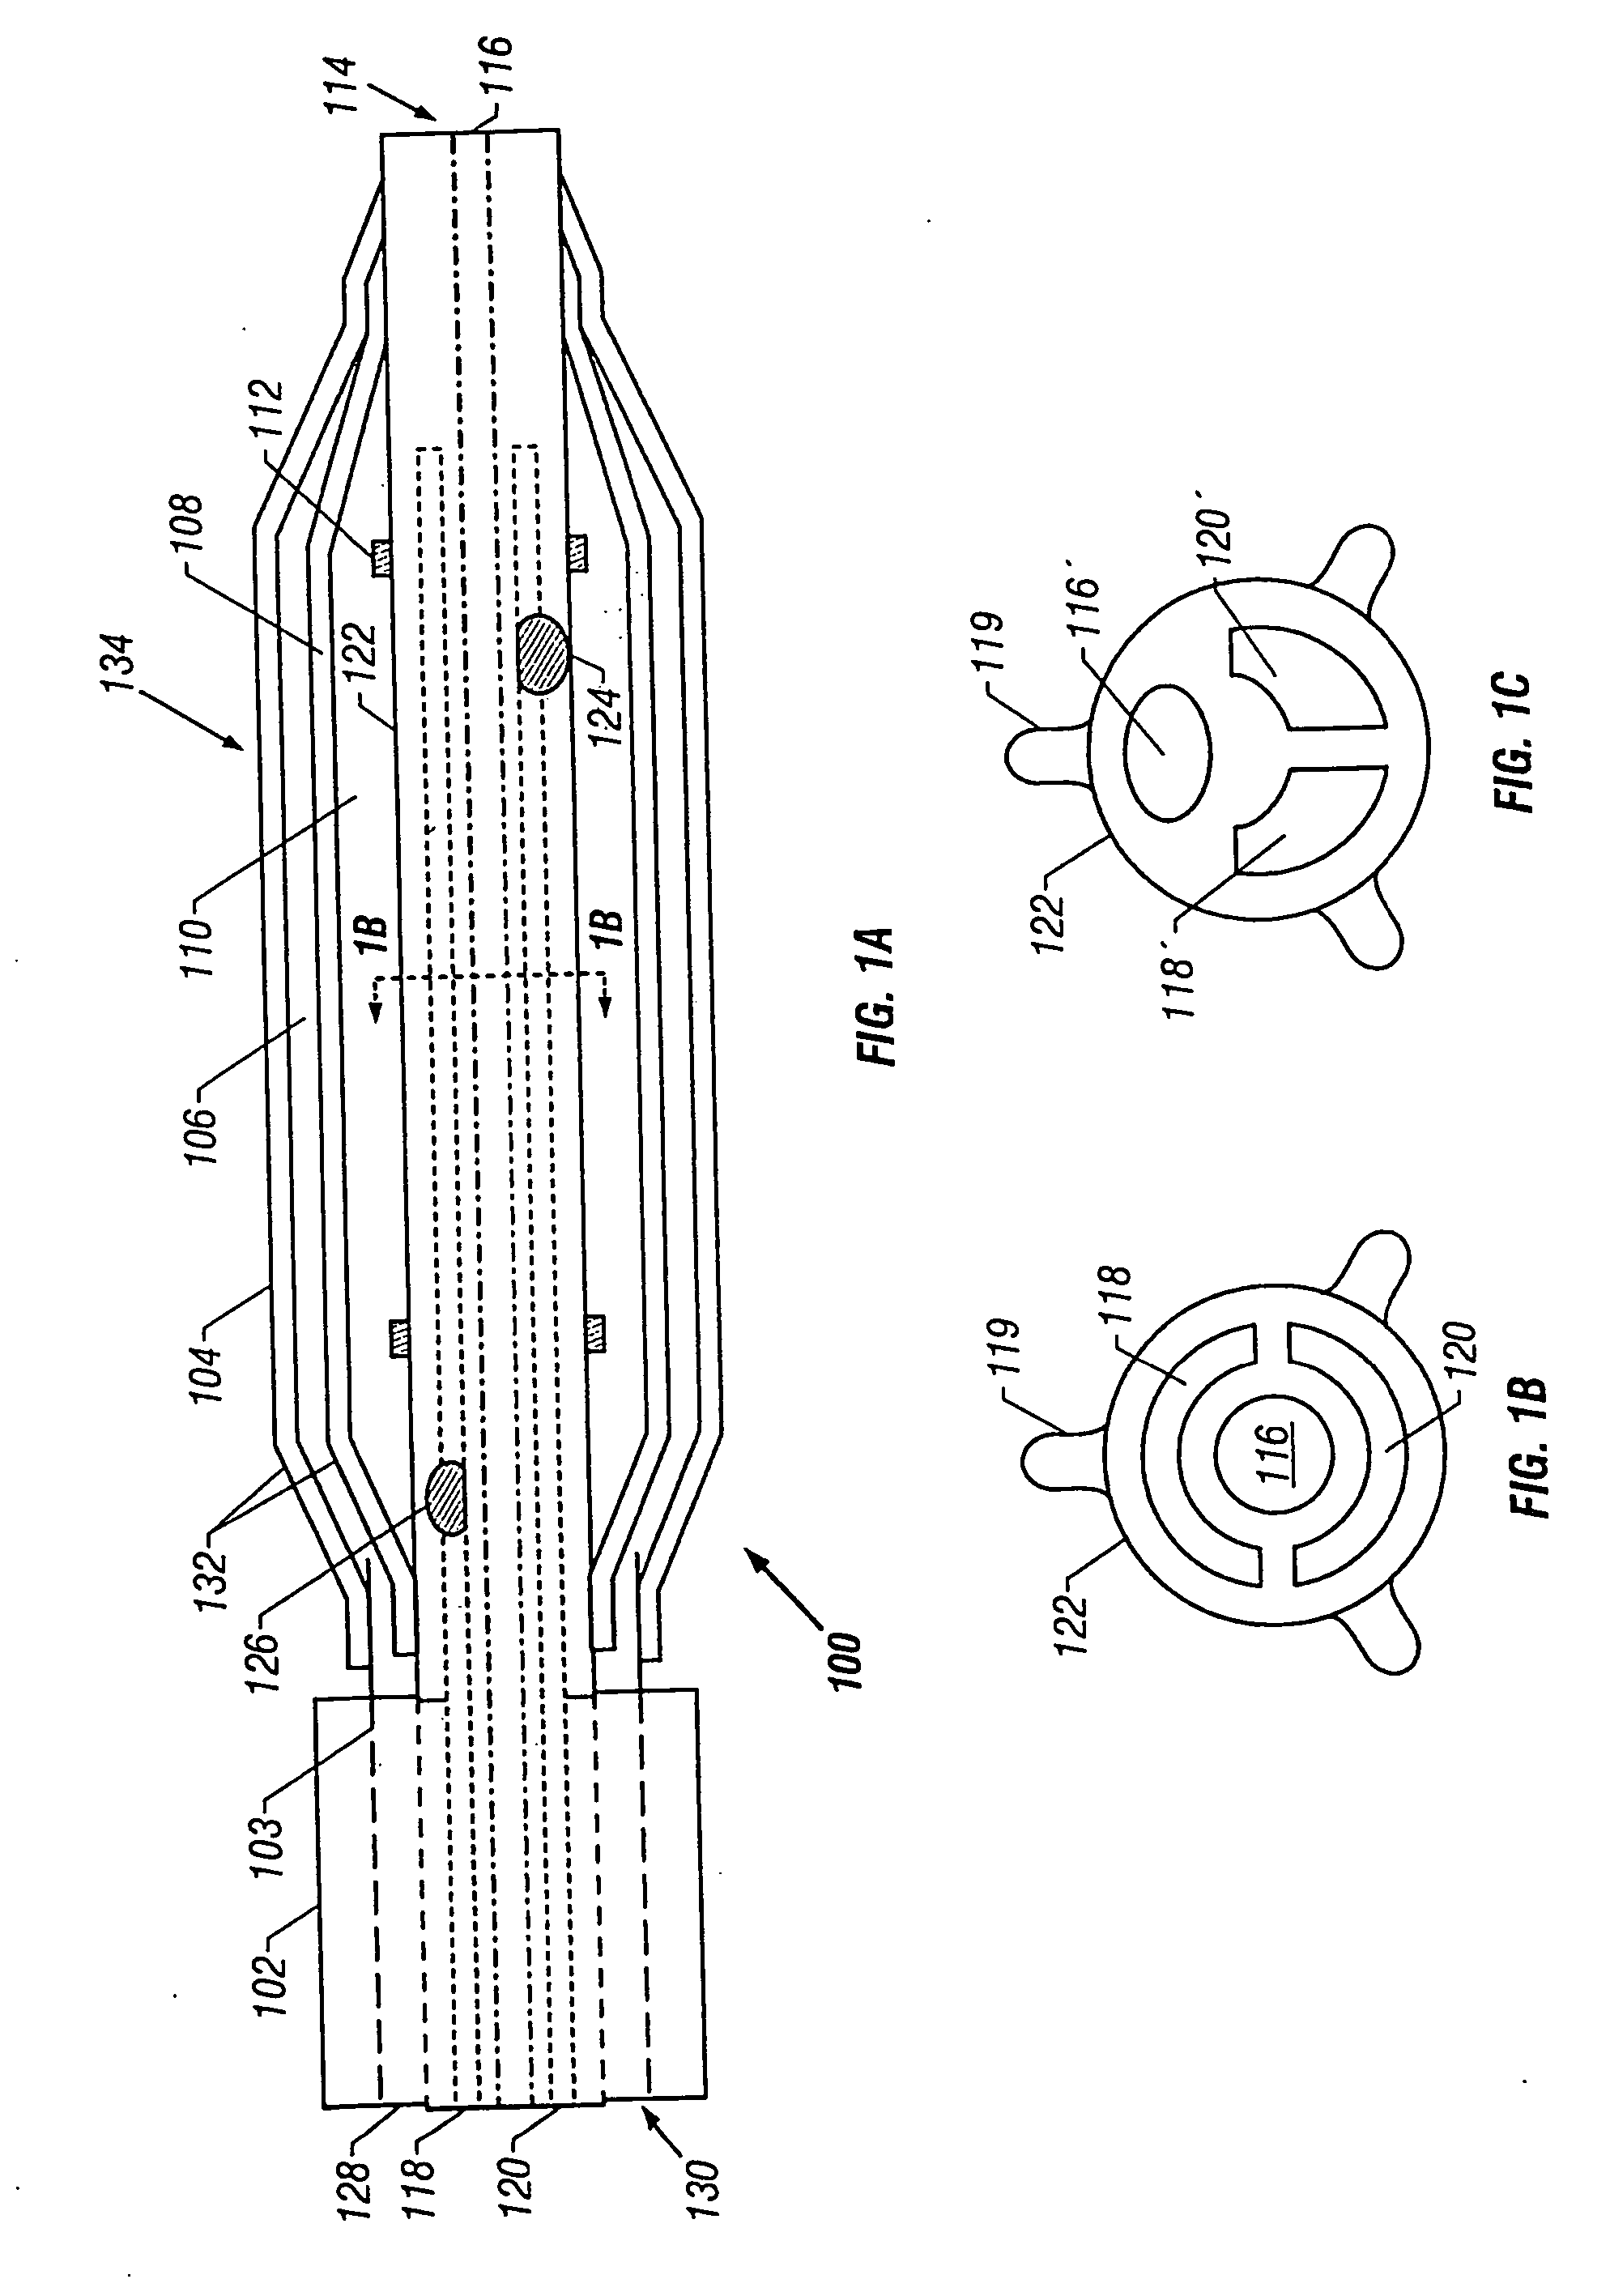 Method and device for performing cooling- or cryo-therapies for, e.g., angioplasty with reduced restenosis or pulmonary vein cell necrosis to inhibit atrial fibrillation employing tissue protection